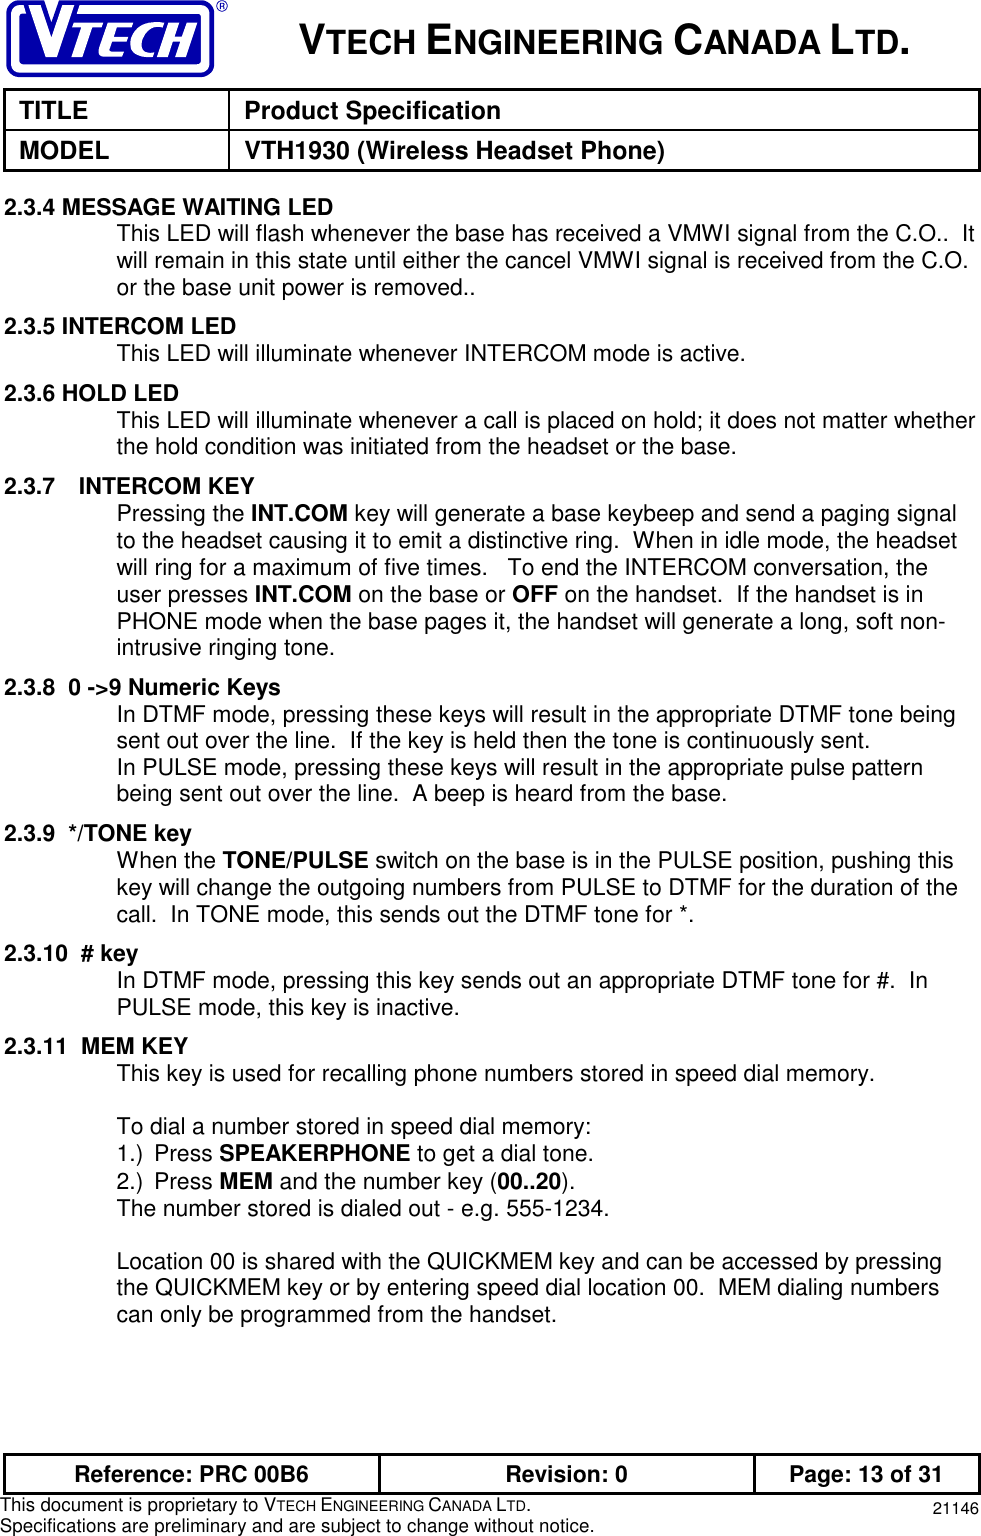 VTECH ENGINEERING CANADA LTD.TITLE Product SpecificationMODEL VTH1930 (Wireless Headset Phone)Reference: PRC 00B6 Revision: 0 Page: 13 of 31This document is proprietary to VTECH ENGINEERING CANADA LTD.Specifications are preliminary and are subject to change without notice. 211462.3.4 MESSAGE WAITING LEDThis LED will flash whenever the base has received a VMWI signal from the C.O..  Itwill remain in this state until either the cancel VMWI signal is received from the C.O.or the base unit power is removed..2.3.5 INTERCOM LEDThis LED will illuminate whenever INTERCOM mode is active.2.3.6 HOLD LEDThis LED will illuminate whenever a call is placed on hold; it does not matter whetherthe hold condition was initiated from the headset or the base.2.3.7 INTERCOM KEYPressing the INT.COM key will generate a base keybeep and send a paging signalto the headset causing it to emit a distinctive ring.  When in idle mode, the headsetwill ring for a maximum of five times.   To end the INTERCOM conversation, theuser presses INT.COM on the base or OFF on the handset.  If the handset is inPHONE mode when the base pages it, the handset will generate a long, soft non-intrusive ringing tone.2.3.8  0 -&gt;9 Numeric KeysIn DTMF mode, pressing these keys will result in the appropriate DTMF tone beingsent out over the line.  If the key is held then the tone is continuously sent.In PULSE mode, pressing these keys will result in the appropriate pulse patternbeing sent out over the line.  A beep is heard from the base.2.3.9  */TONE keyWhen the TONE/PULSE switch on the base is in the PULSE position, pushing thiskey will change the outgoing numbers from PULSE to DTMF for the duration of thecall.  In TONE mode, this sends out the DTMF tone for *.2.3.10  # keyIn DTMF mode, pressing this key sends out an appropriate DTMF tone for #.  InPULSE mode, this key is inactive.2.3.11  MEM KEYThis key is used for recalling phone numbers stored in speed dial memory.To dial a number stored in speed dial memory:1.) Press SPEAKERPHONE to get a dial tone.2.) Press MEM and the number key (00..20).The number stored is dialed out - e.g. 555-1234.Location 00 is shared with the QUICKMEM key and can be accessed by pressingthe QUICKMEM key or by entering speed dial location 00.  MEM dialing numberscan only be programmed from the handset.